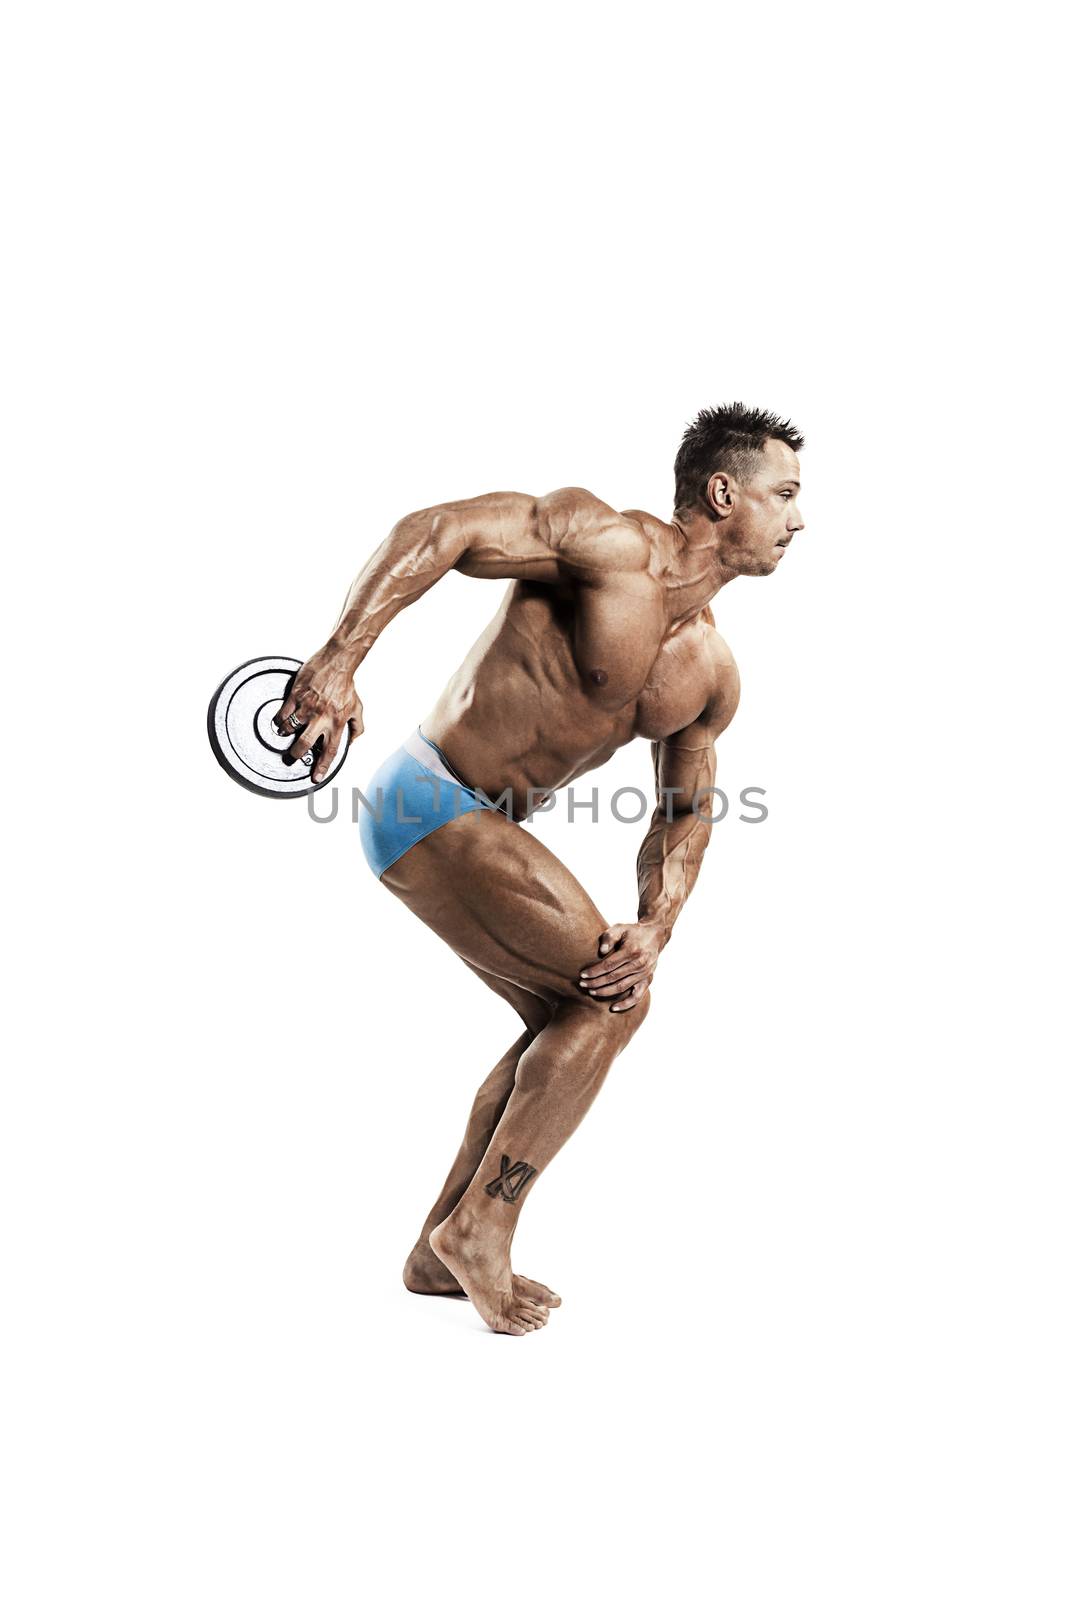 Man with weight training equipment on background